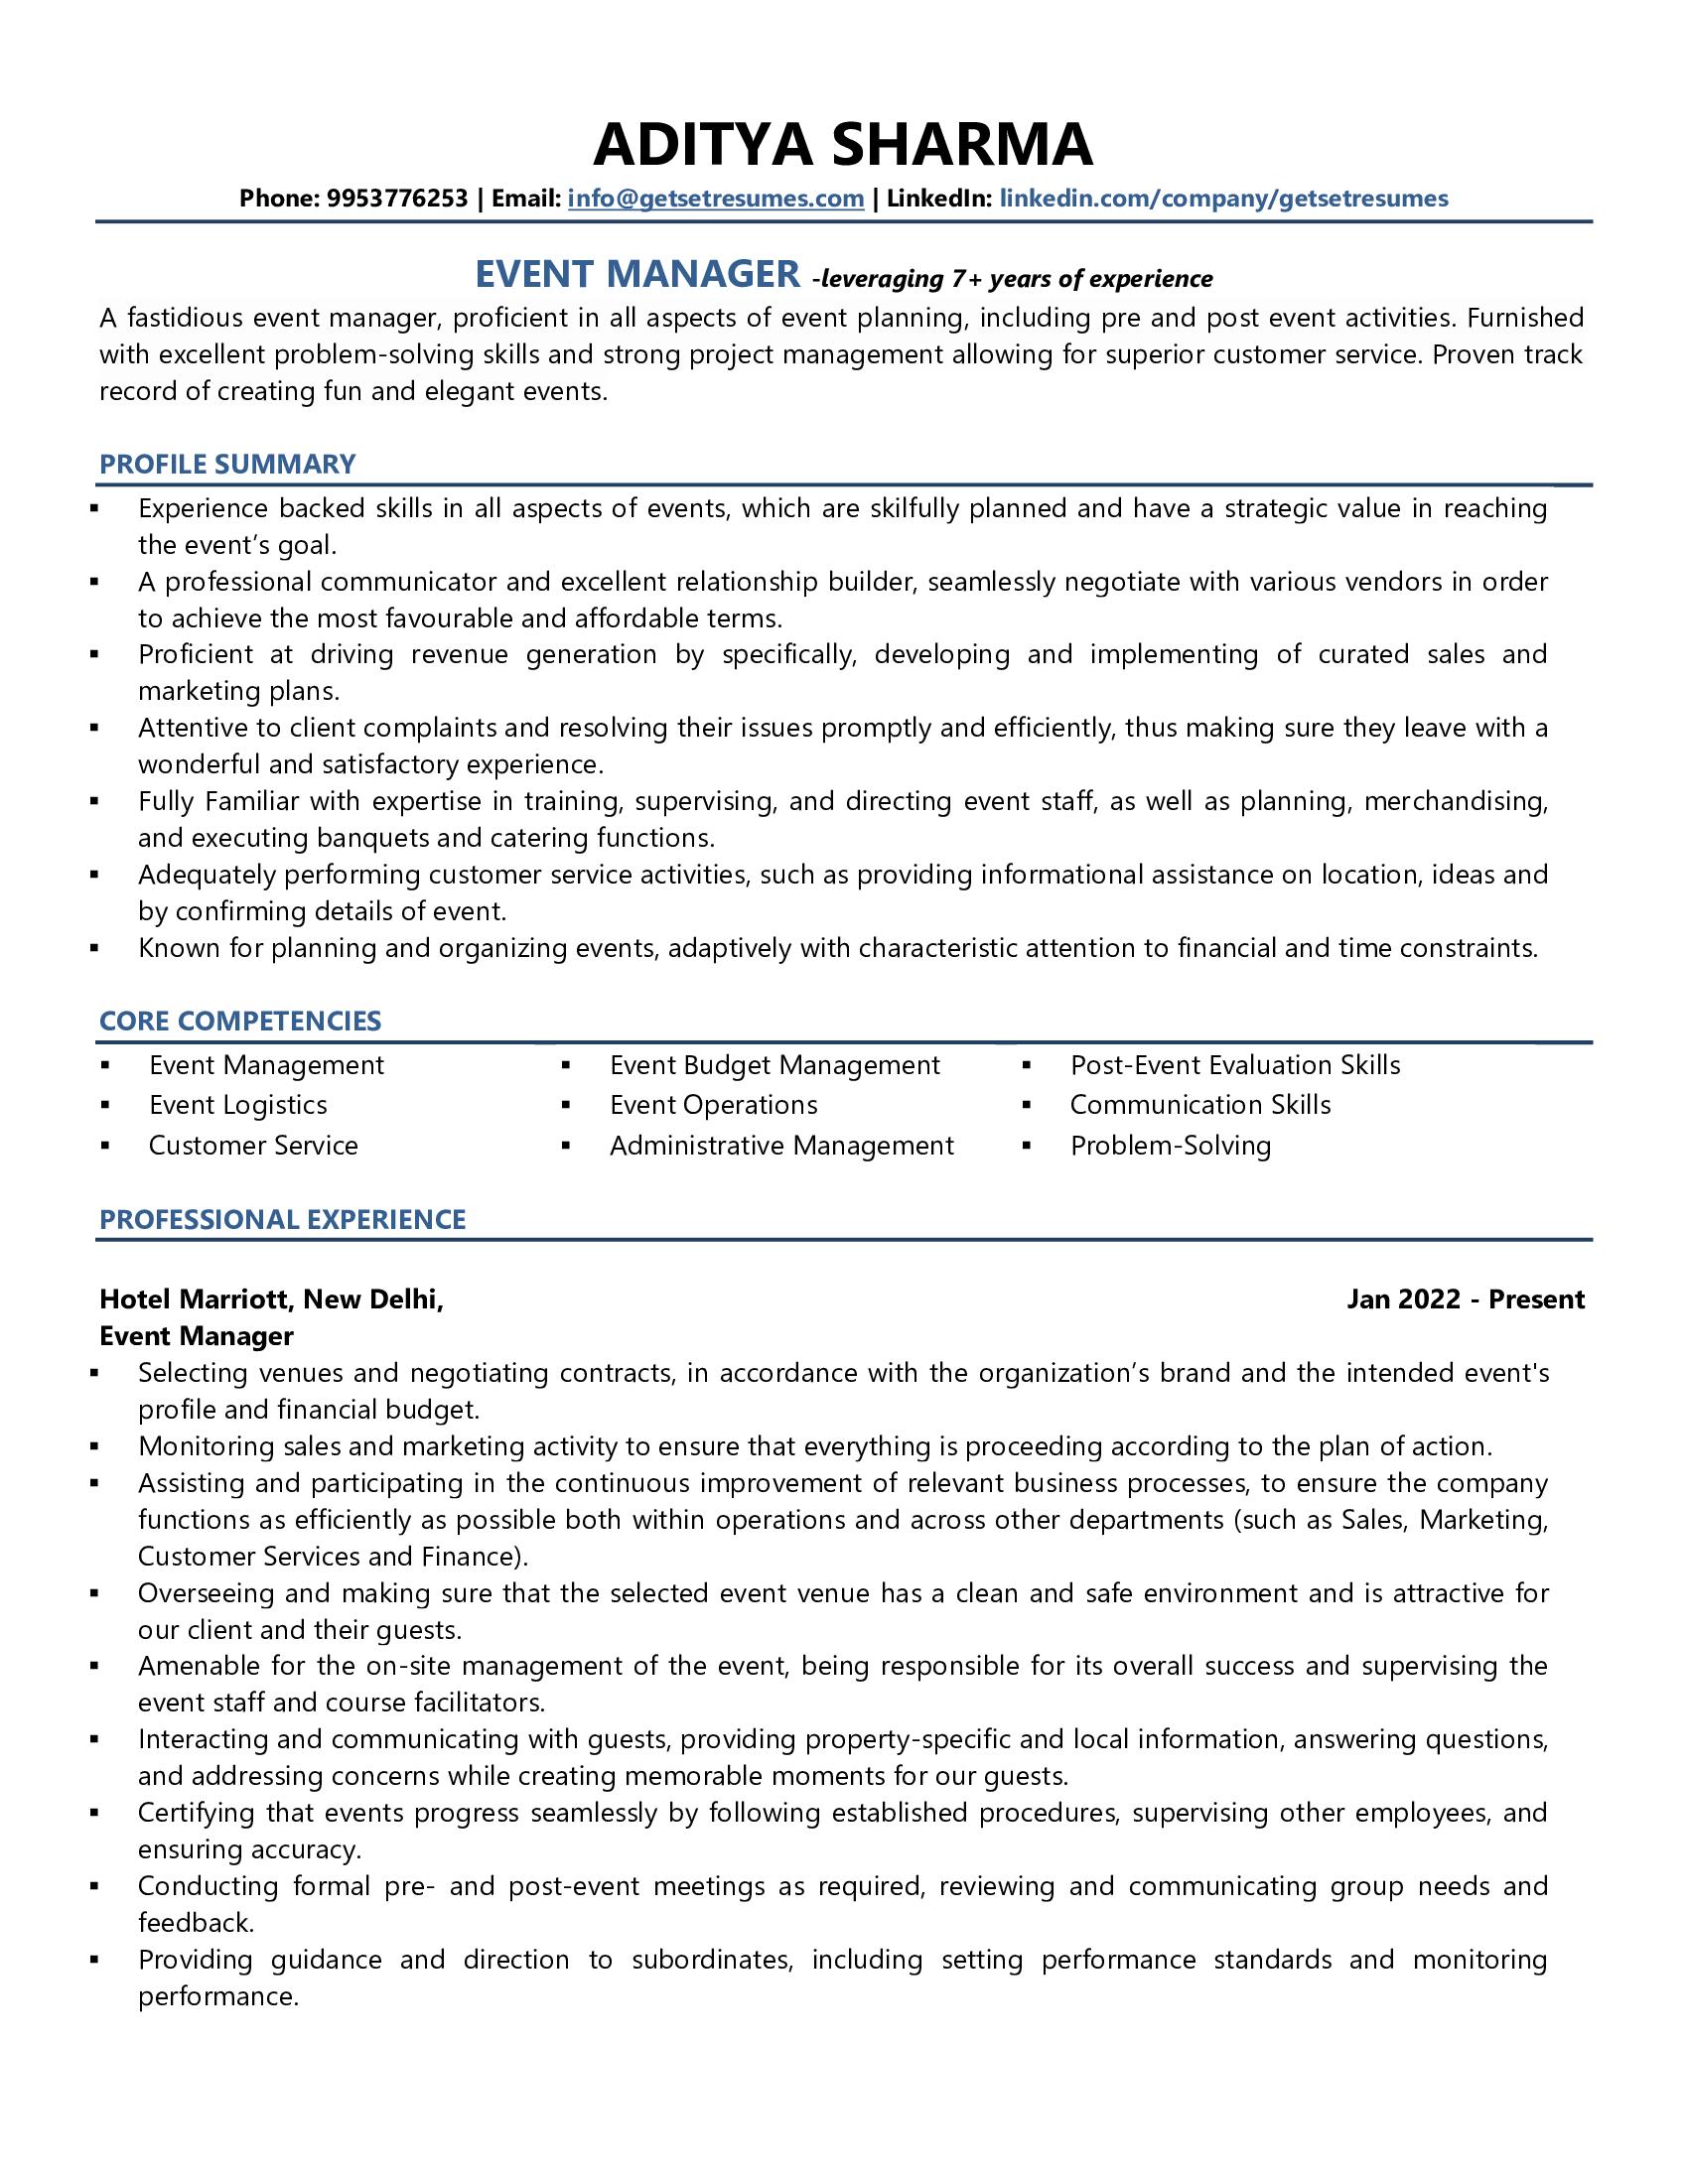 Event Manager - Resume Example & Template